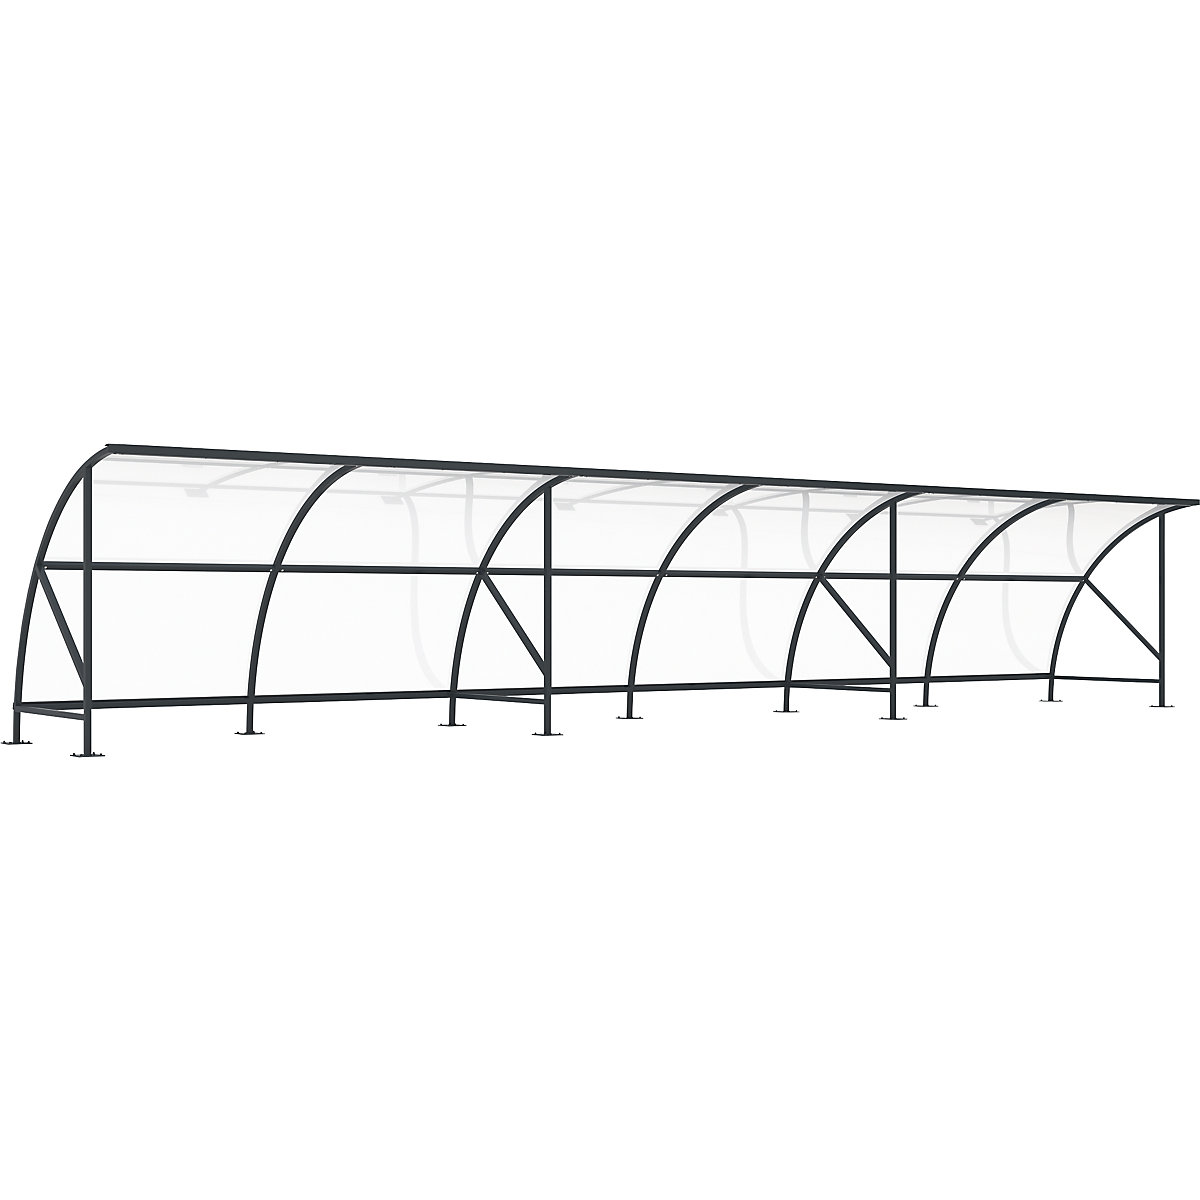 Bicycle shelter, made of polycarbonate, WxD 12350 x 2100 mm, charcoal RAL 7016-5